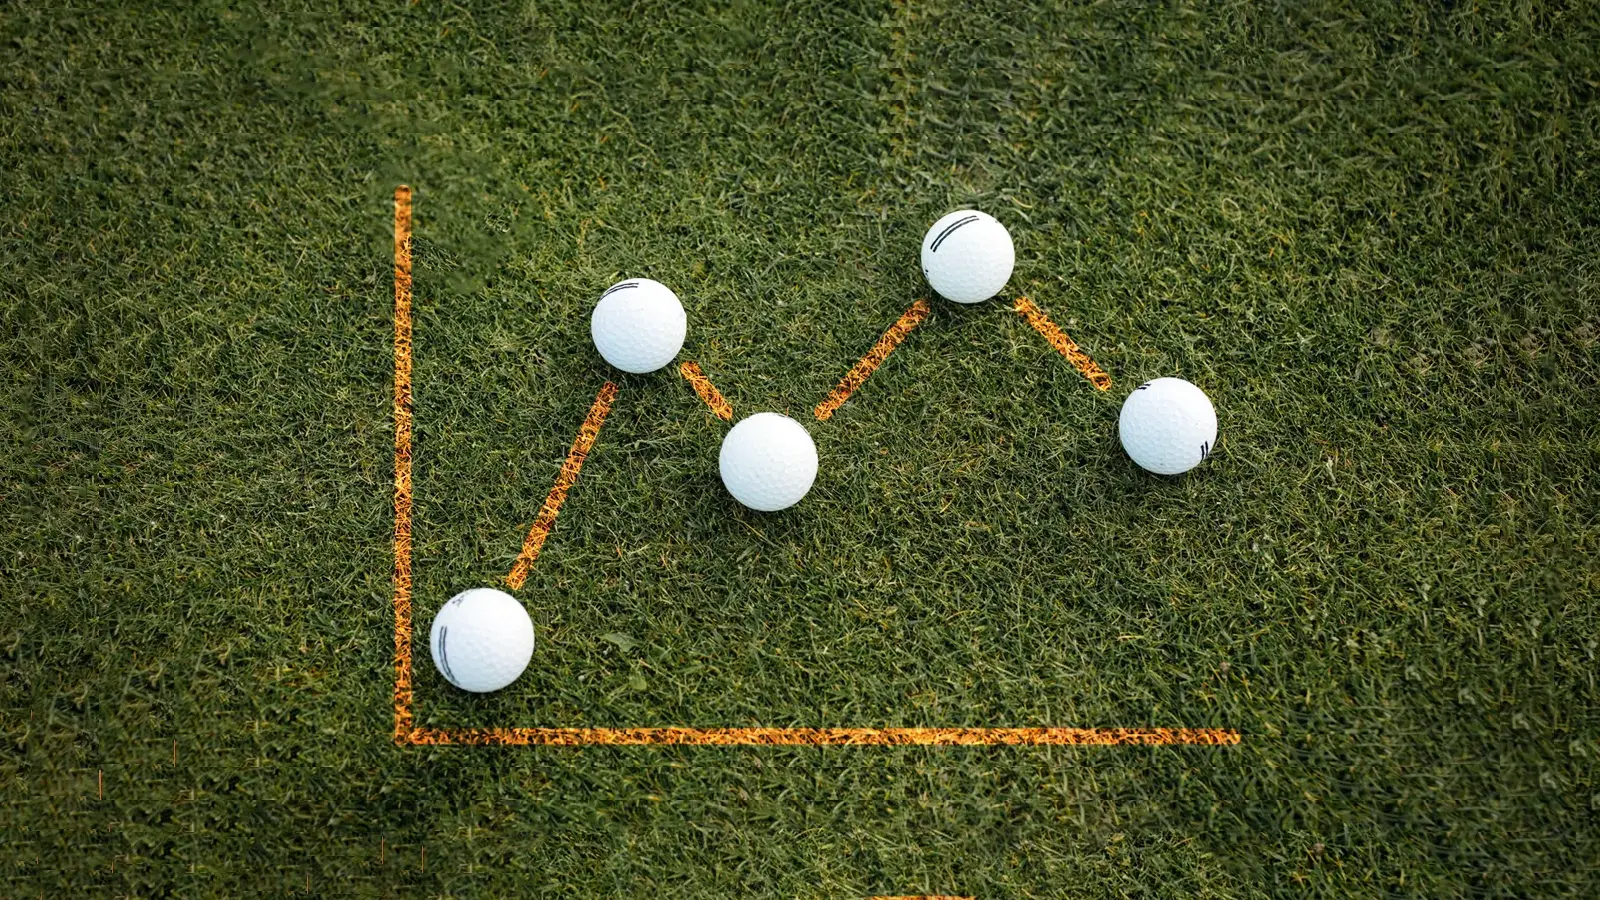 Four white golf balls lined up on the grass in the form of points on a graph